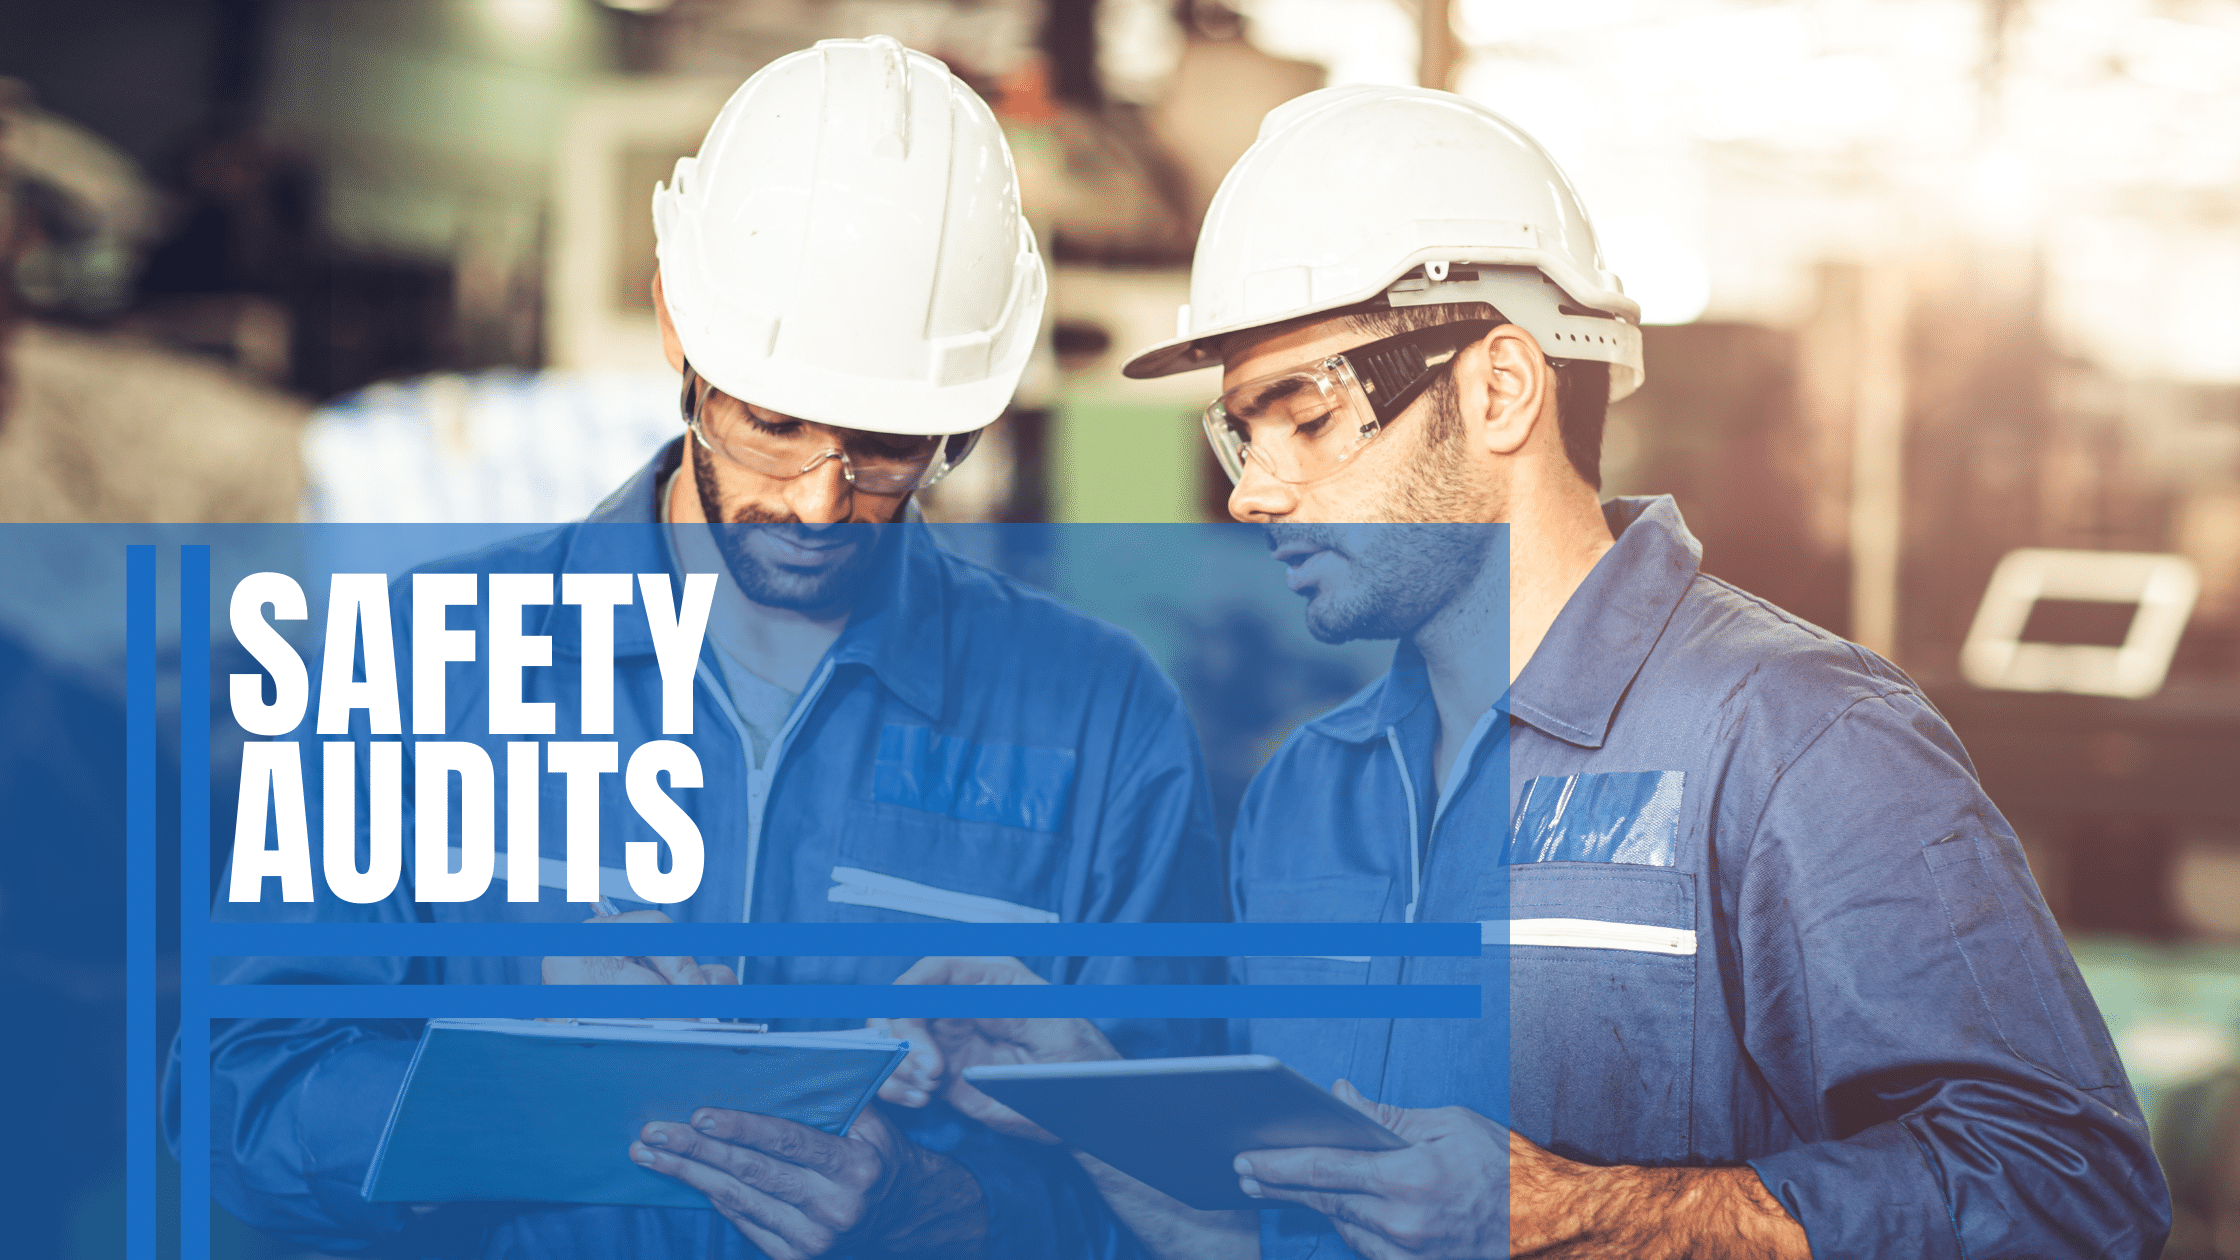 We provide safety auditing services to help companies identify and mitigate safety risks in the workplace